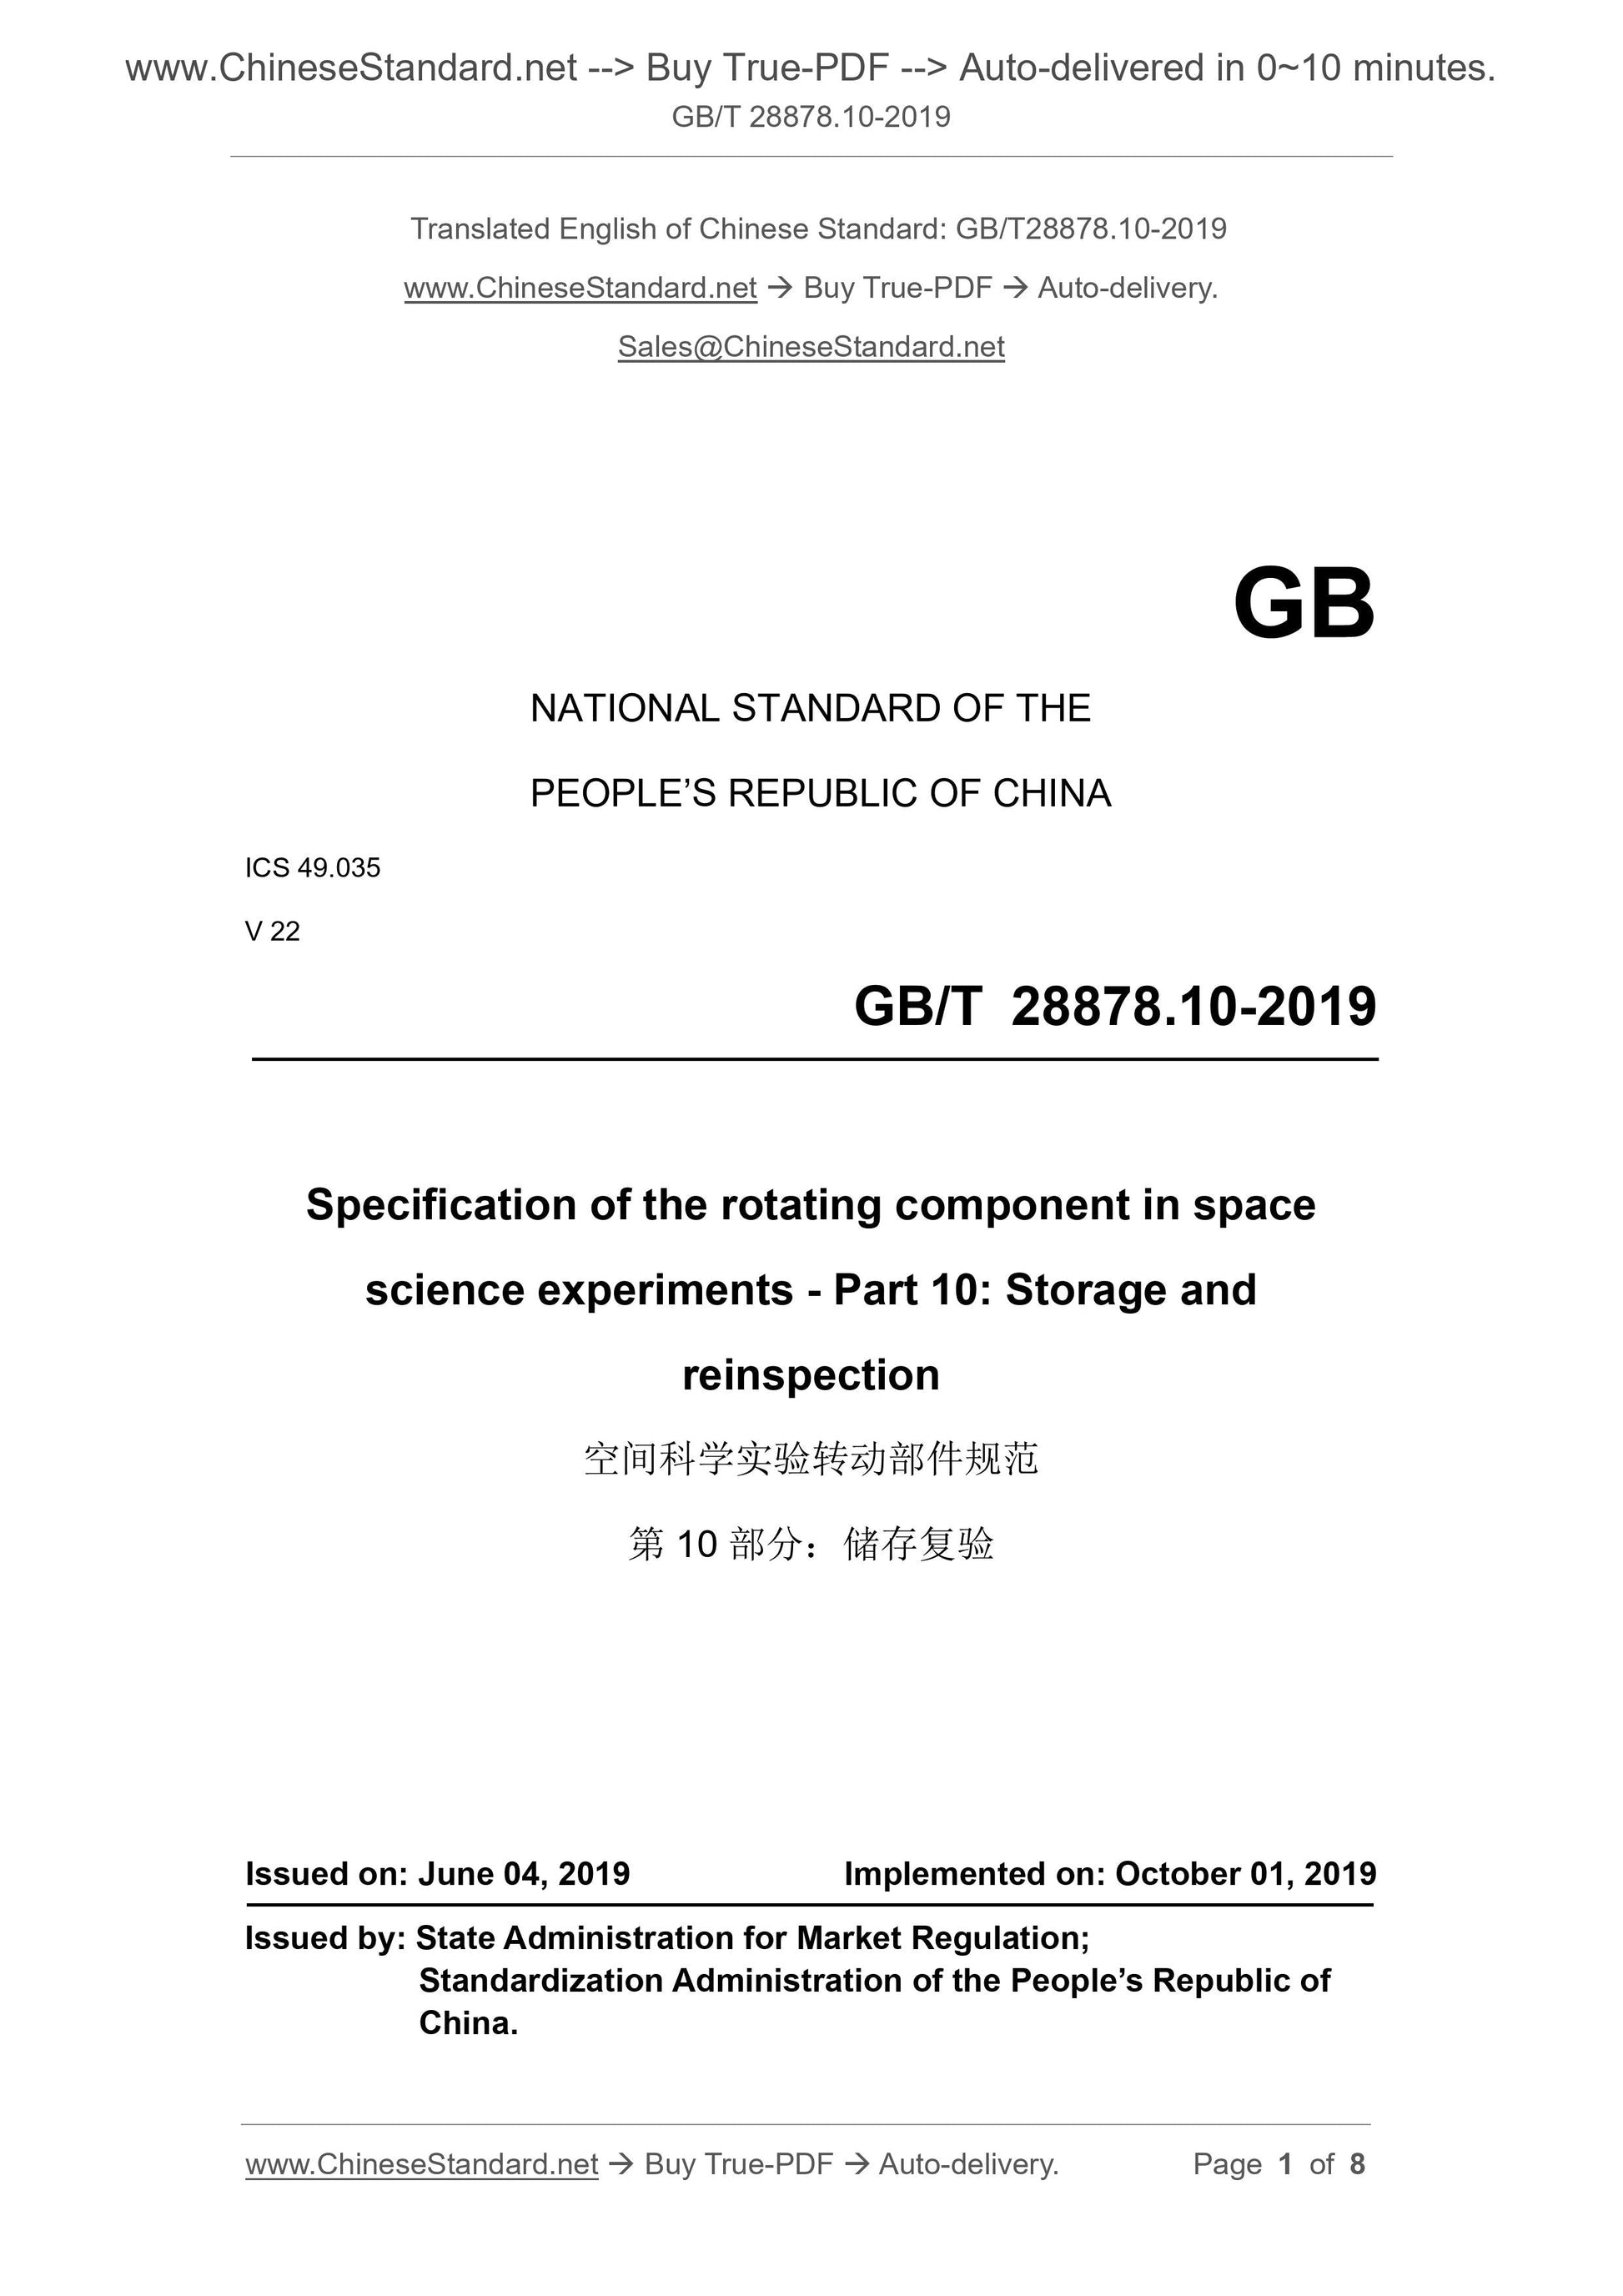 GB/T 28878.10-2019 Page 1